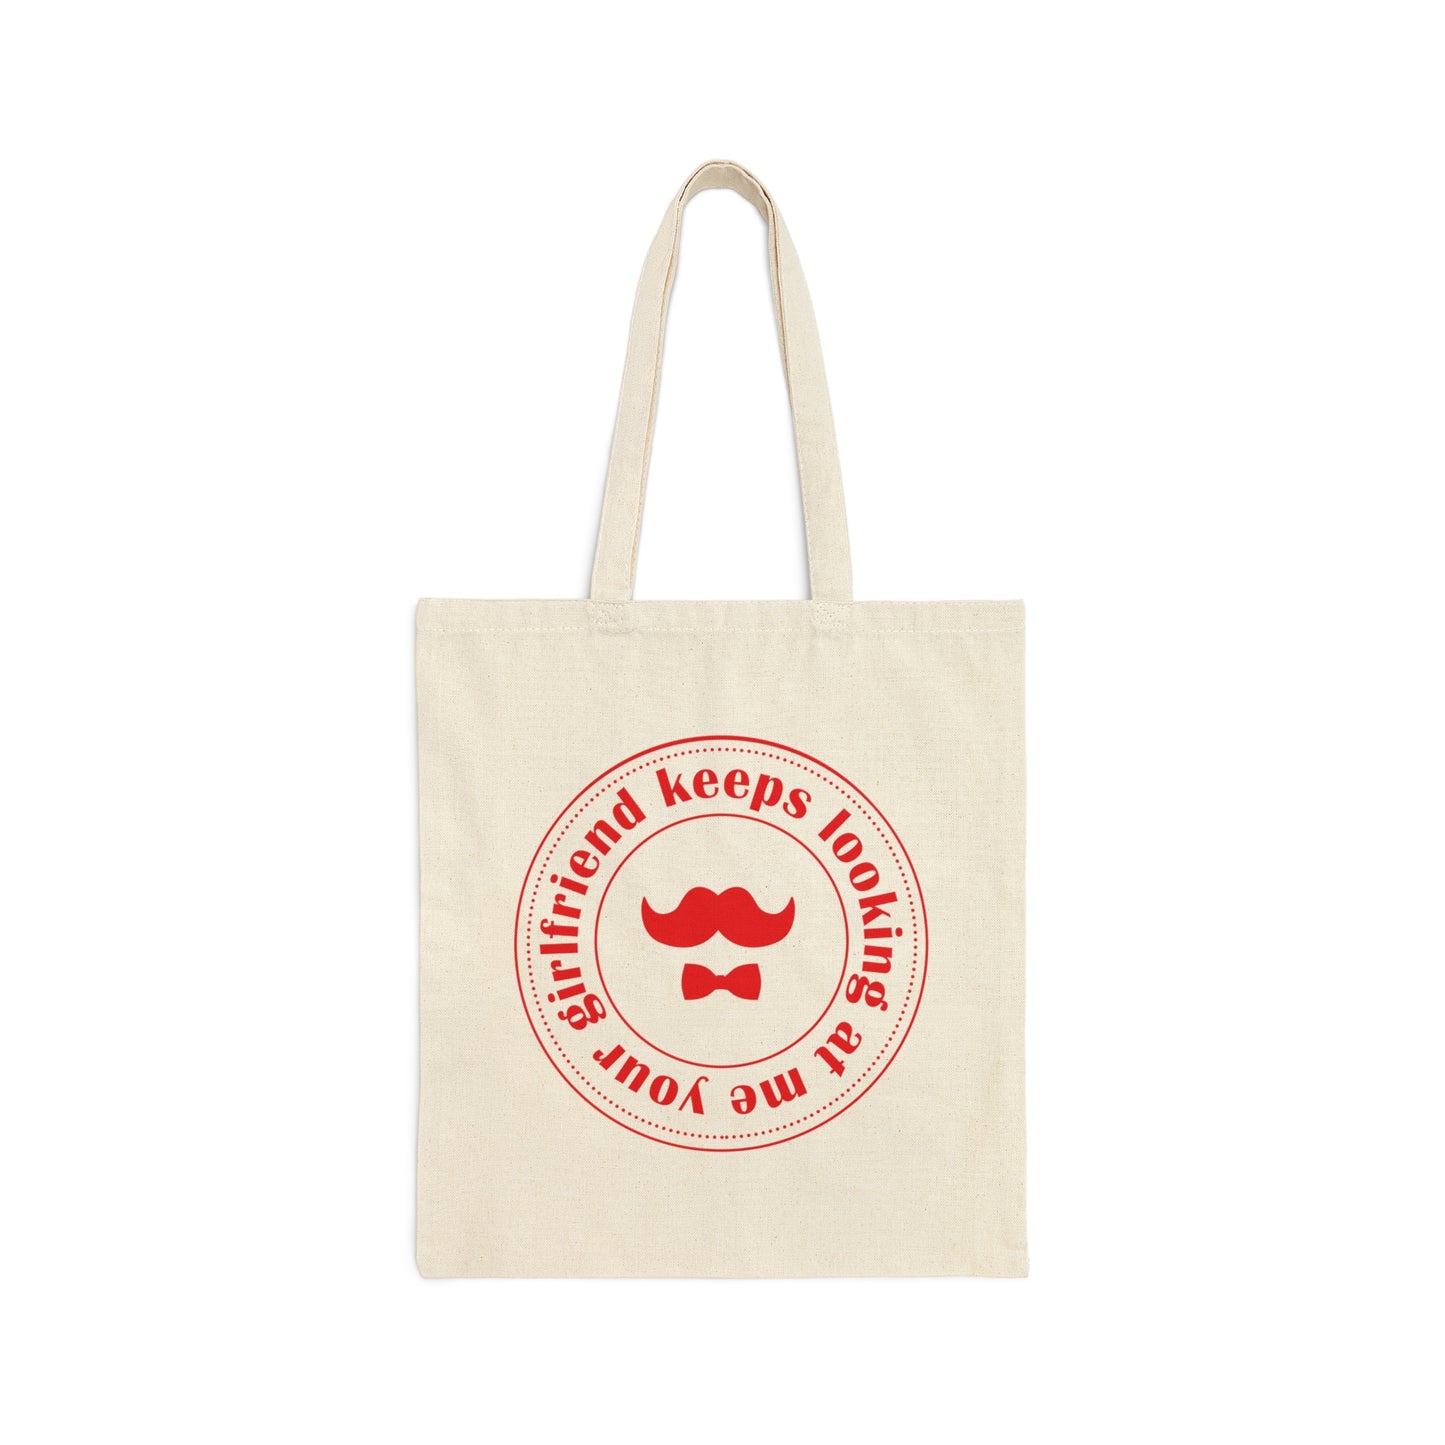 Your Girlfriend Keeps Looking At Me Funny Men Idea Quotes Canvas Shopping Cotton Tote Bag